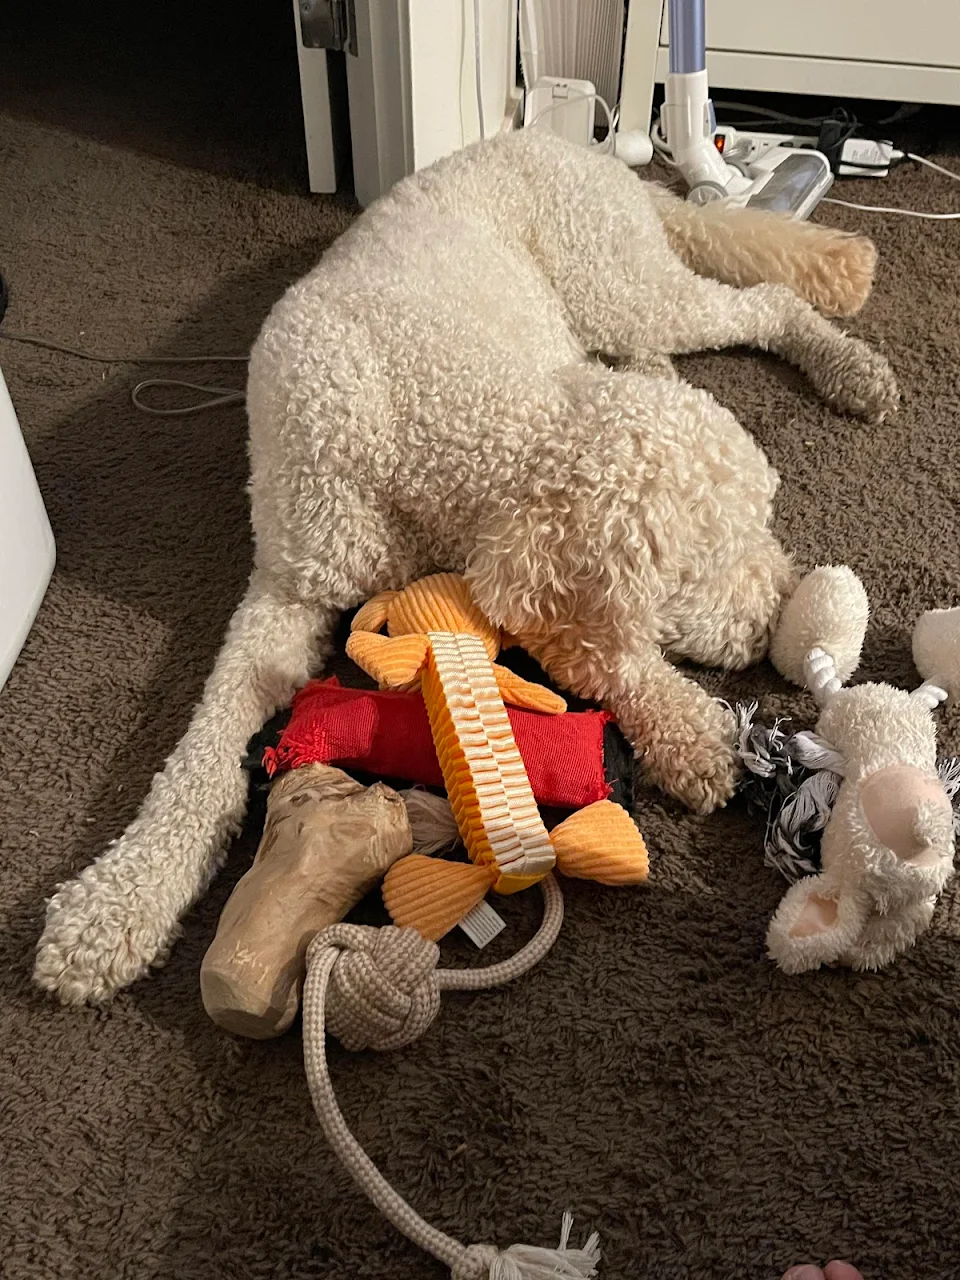 Sometimes Max likes to gather his toys for a nap together